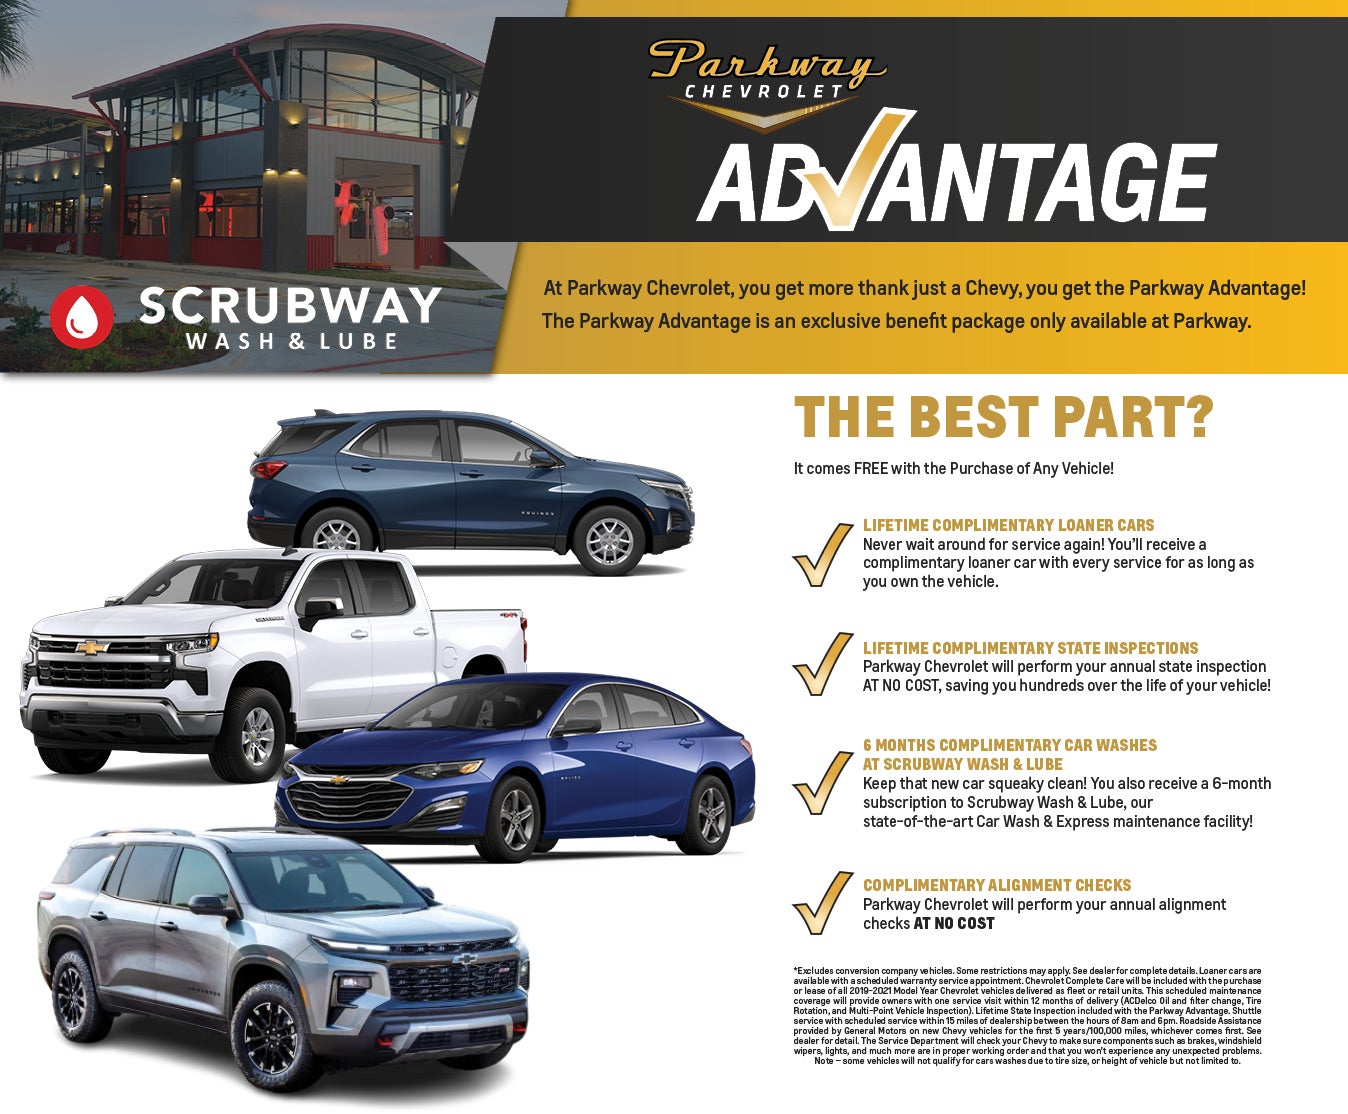 Parkway Chevrolet Advantage: At Parkway Chevrolet, you get more than just a Chevy, you get the Parkway Advantage! The Parkway Advantage is an exclusive benefit package only available at Parkway.